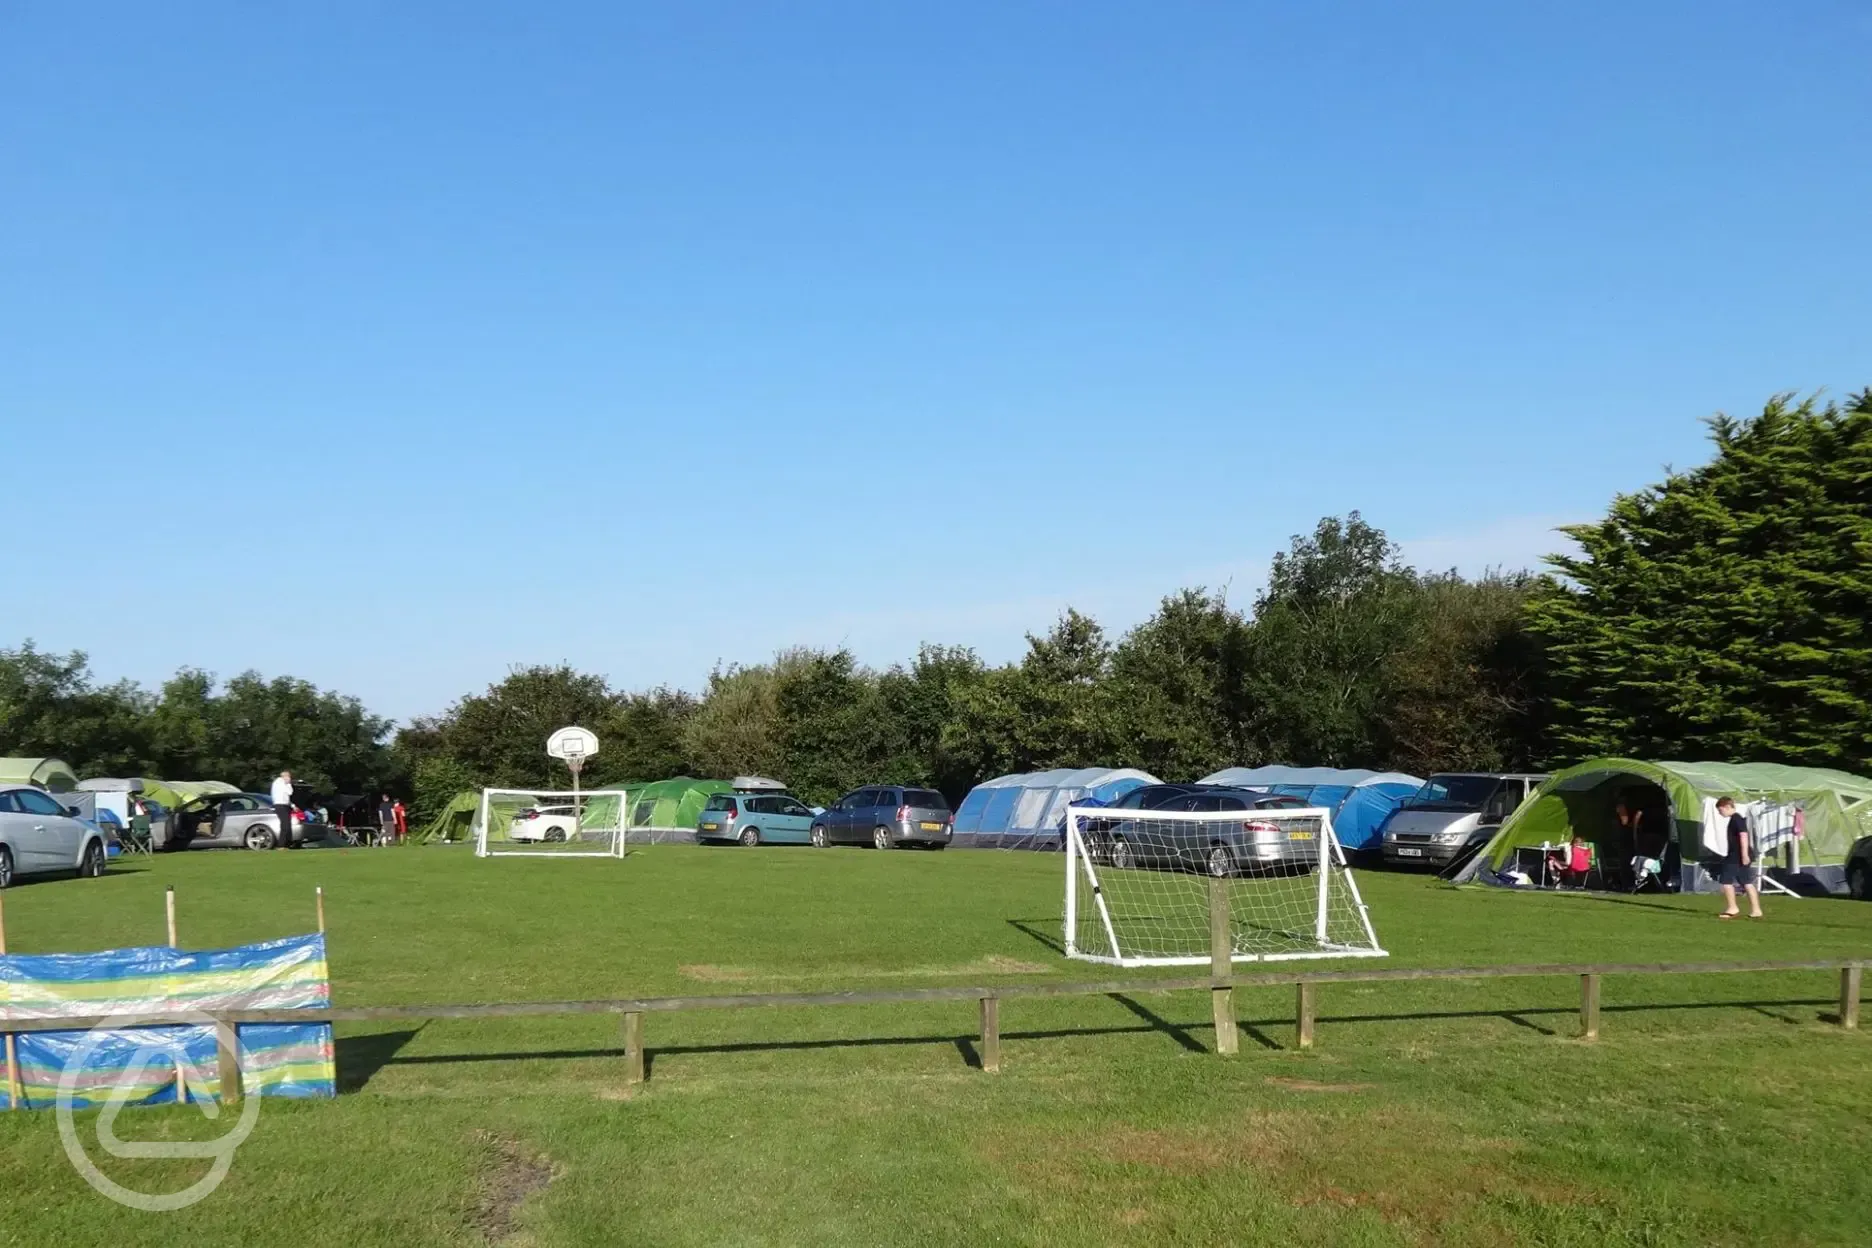 Grass pitches on sports field